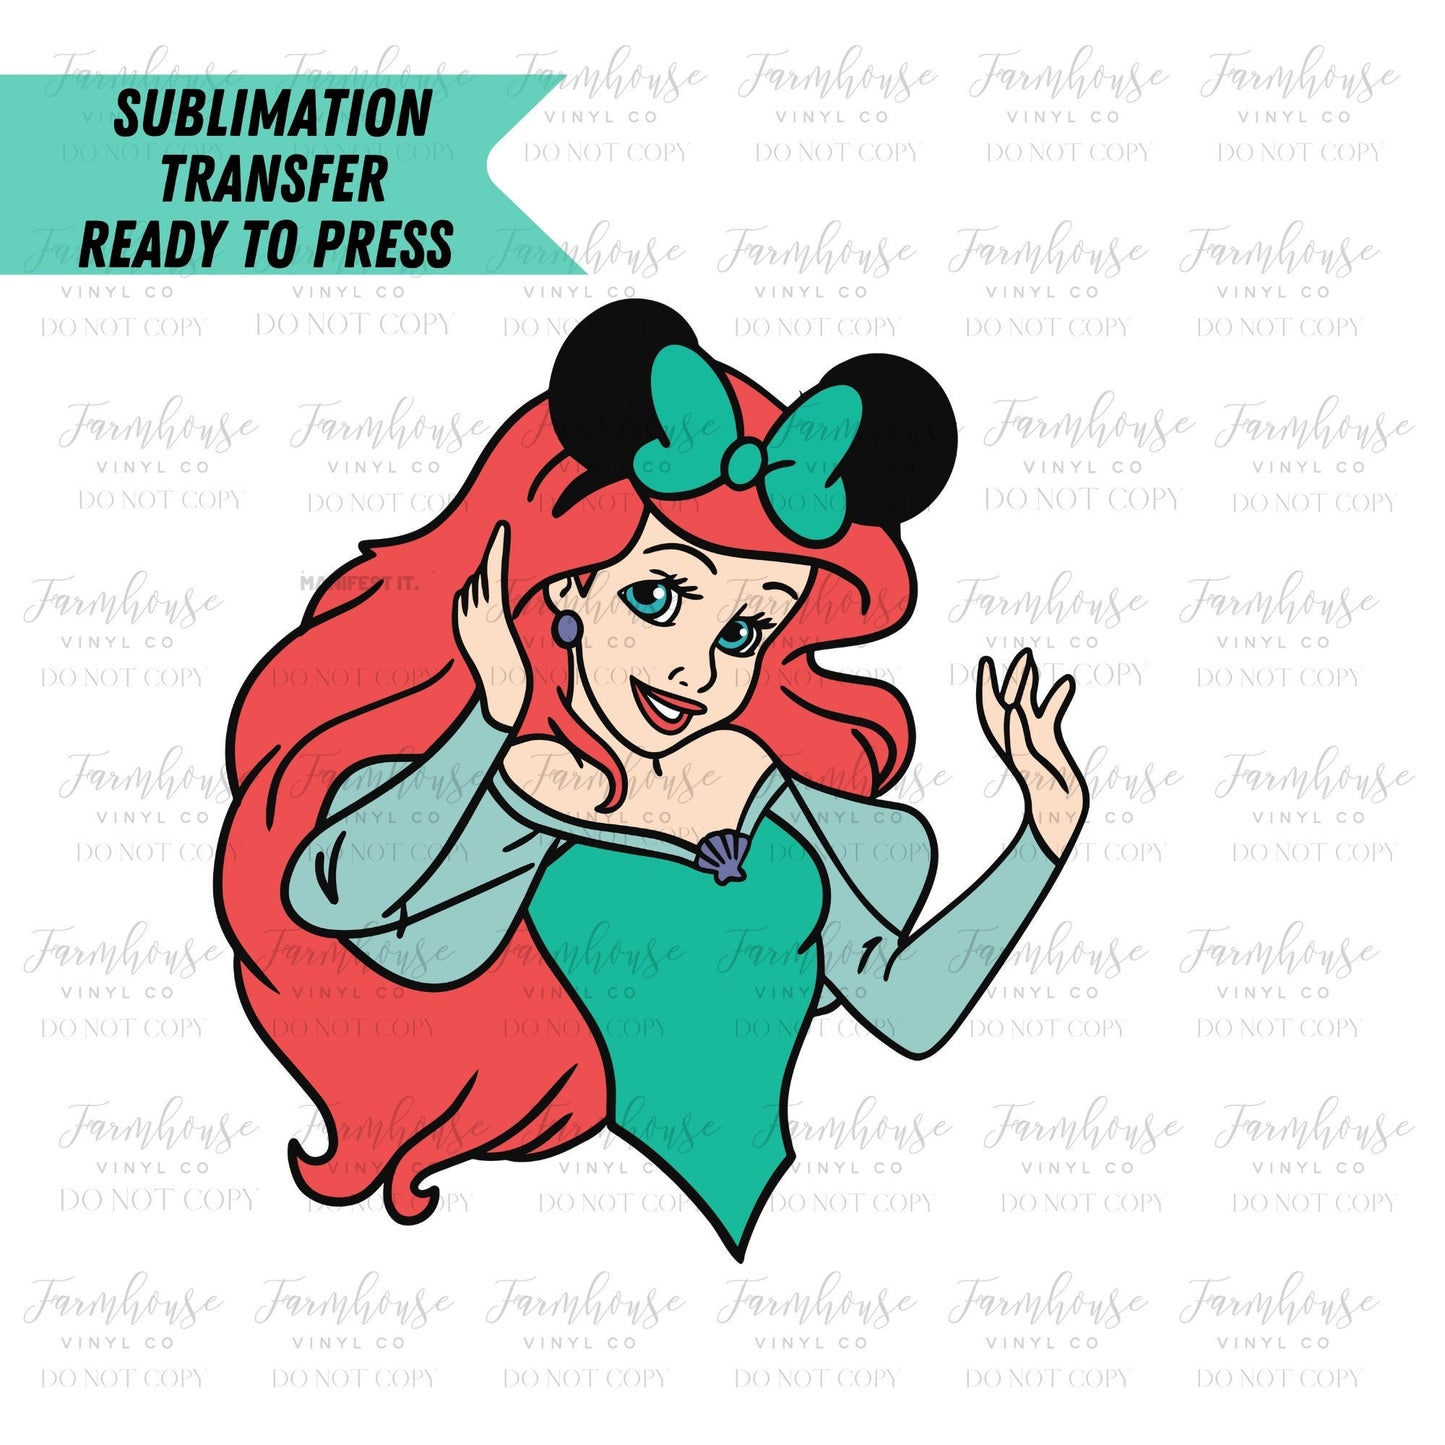 Colorful Watercolor Princess Design, Ready To Press Sublimation Transfer, 50 Years of Magic, Magical Vacation, Sublimate Prints, Heat Design - Farmhouse Vinyl Co